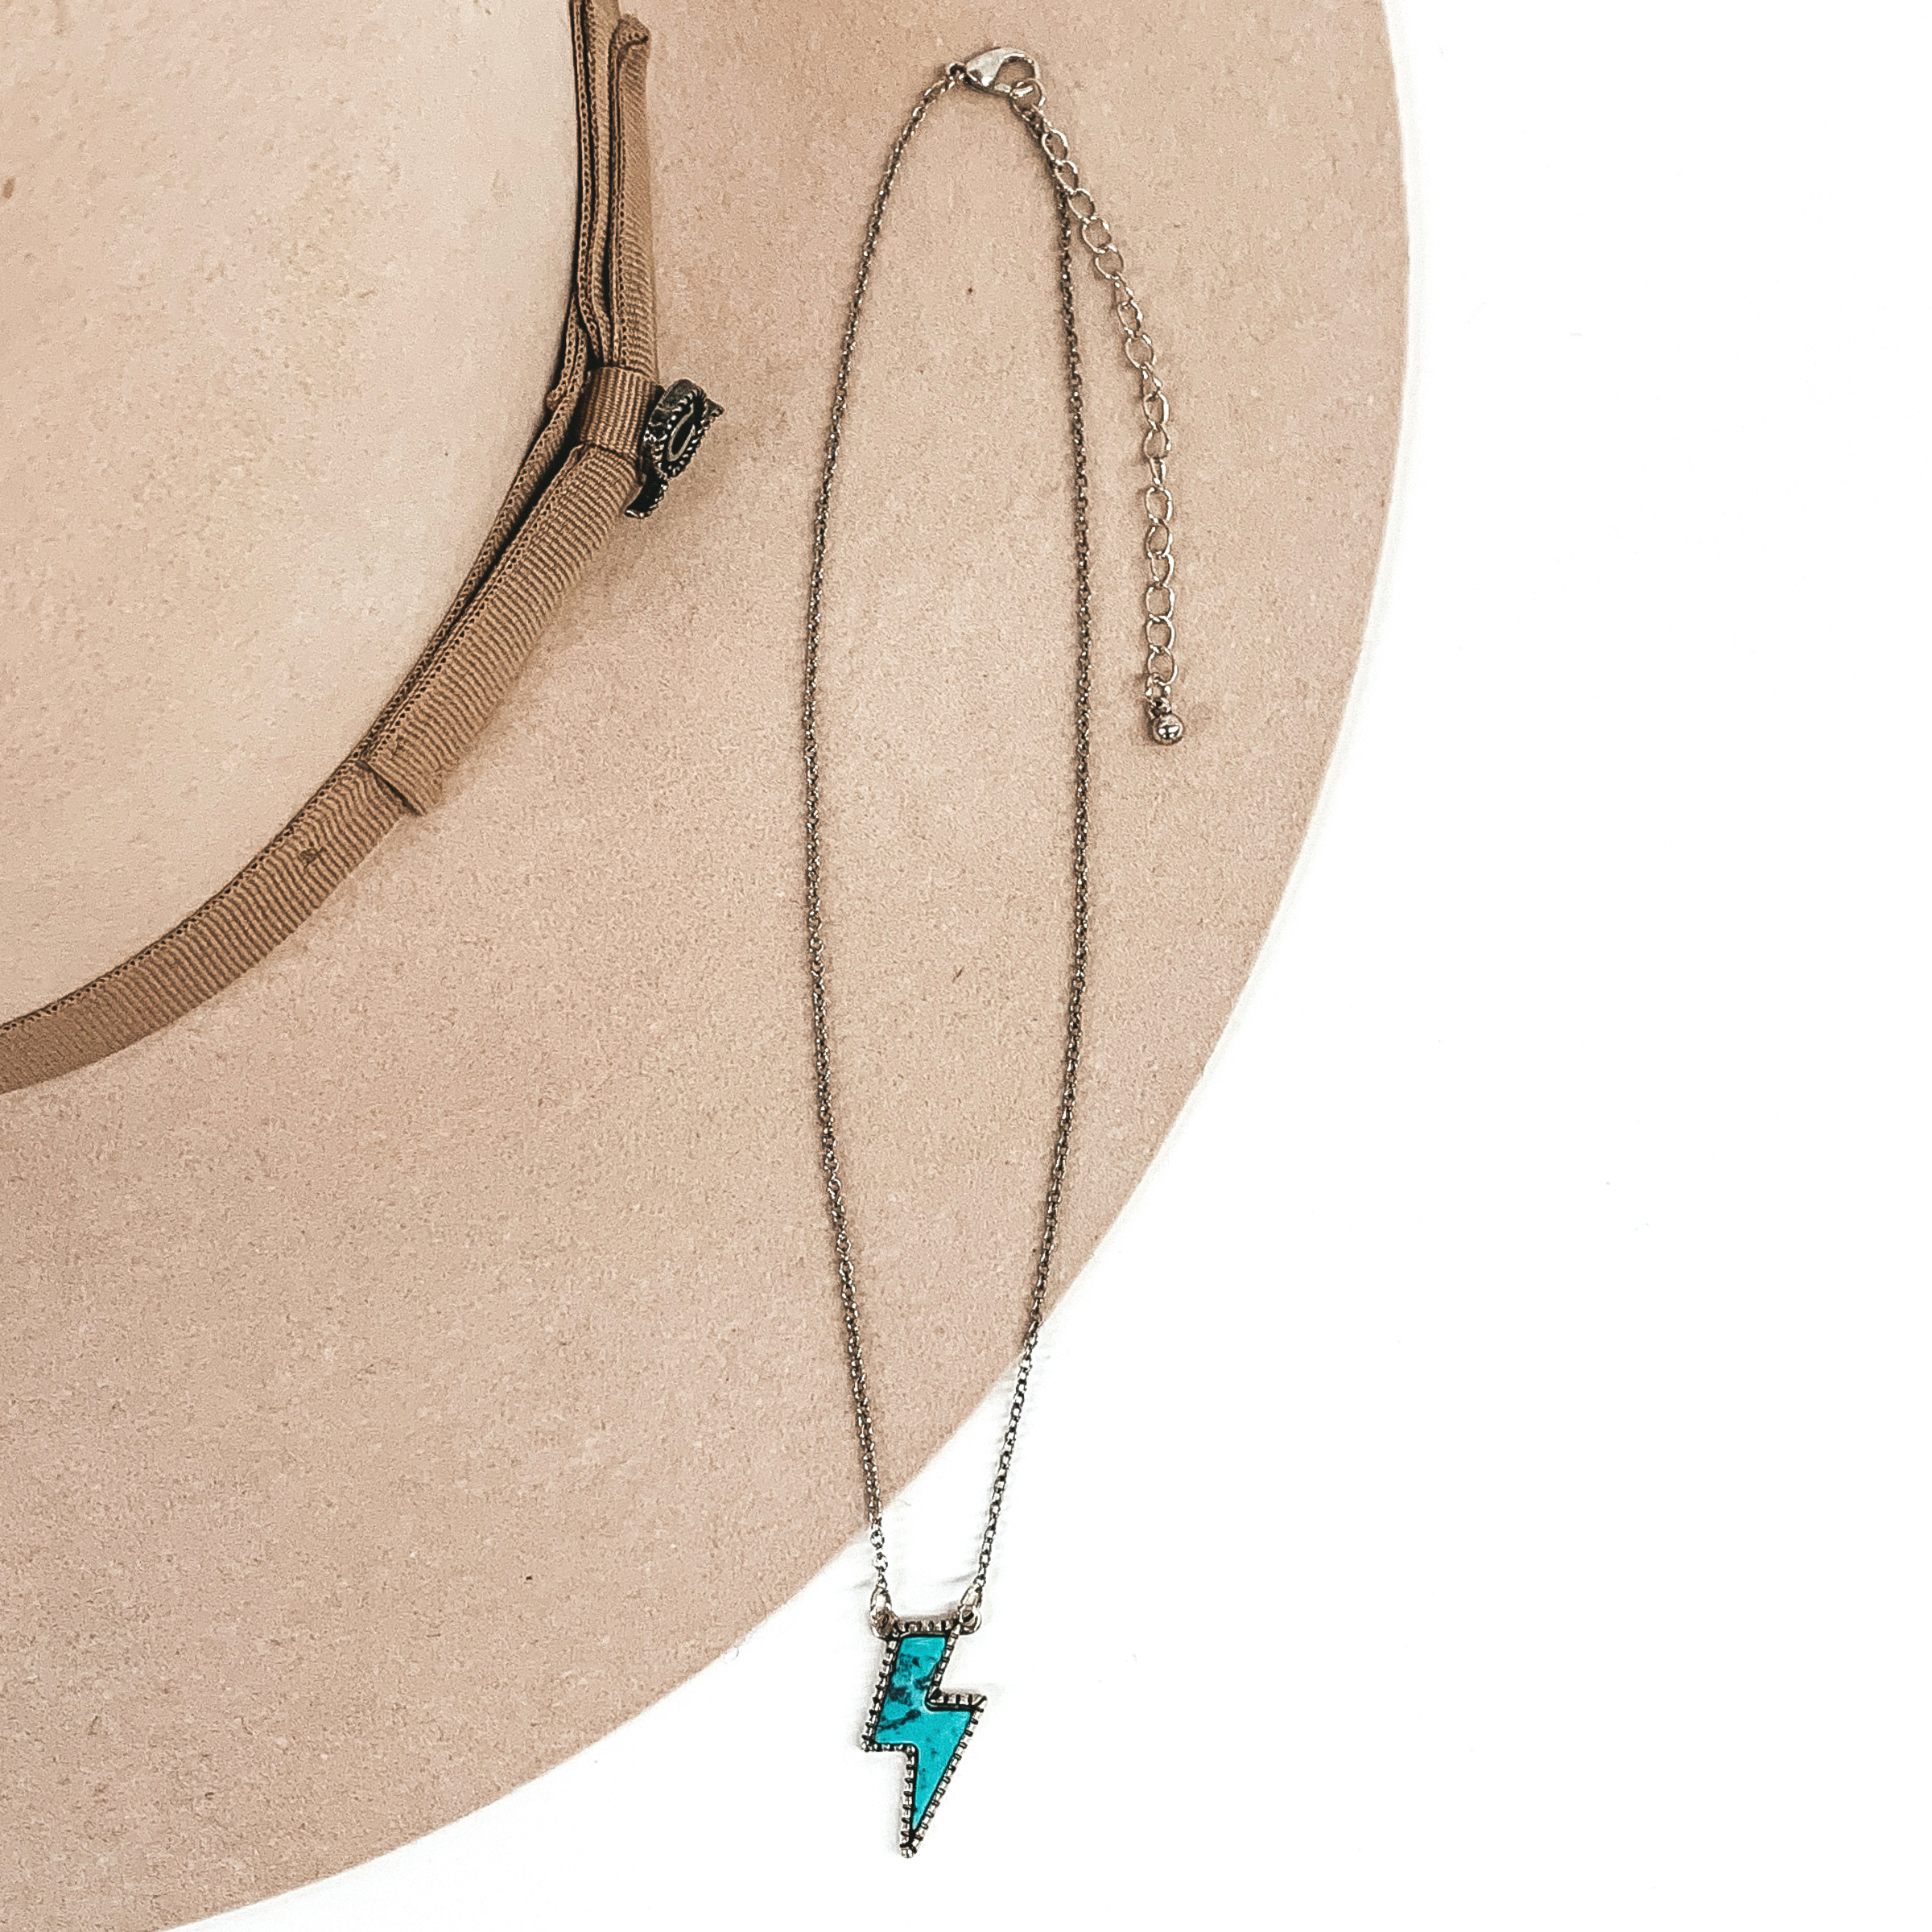 Lightning Bolt Stone Necklace in Turquoise - Giddy Up Glamour Boutique